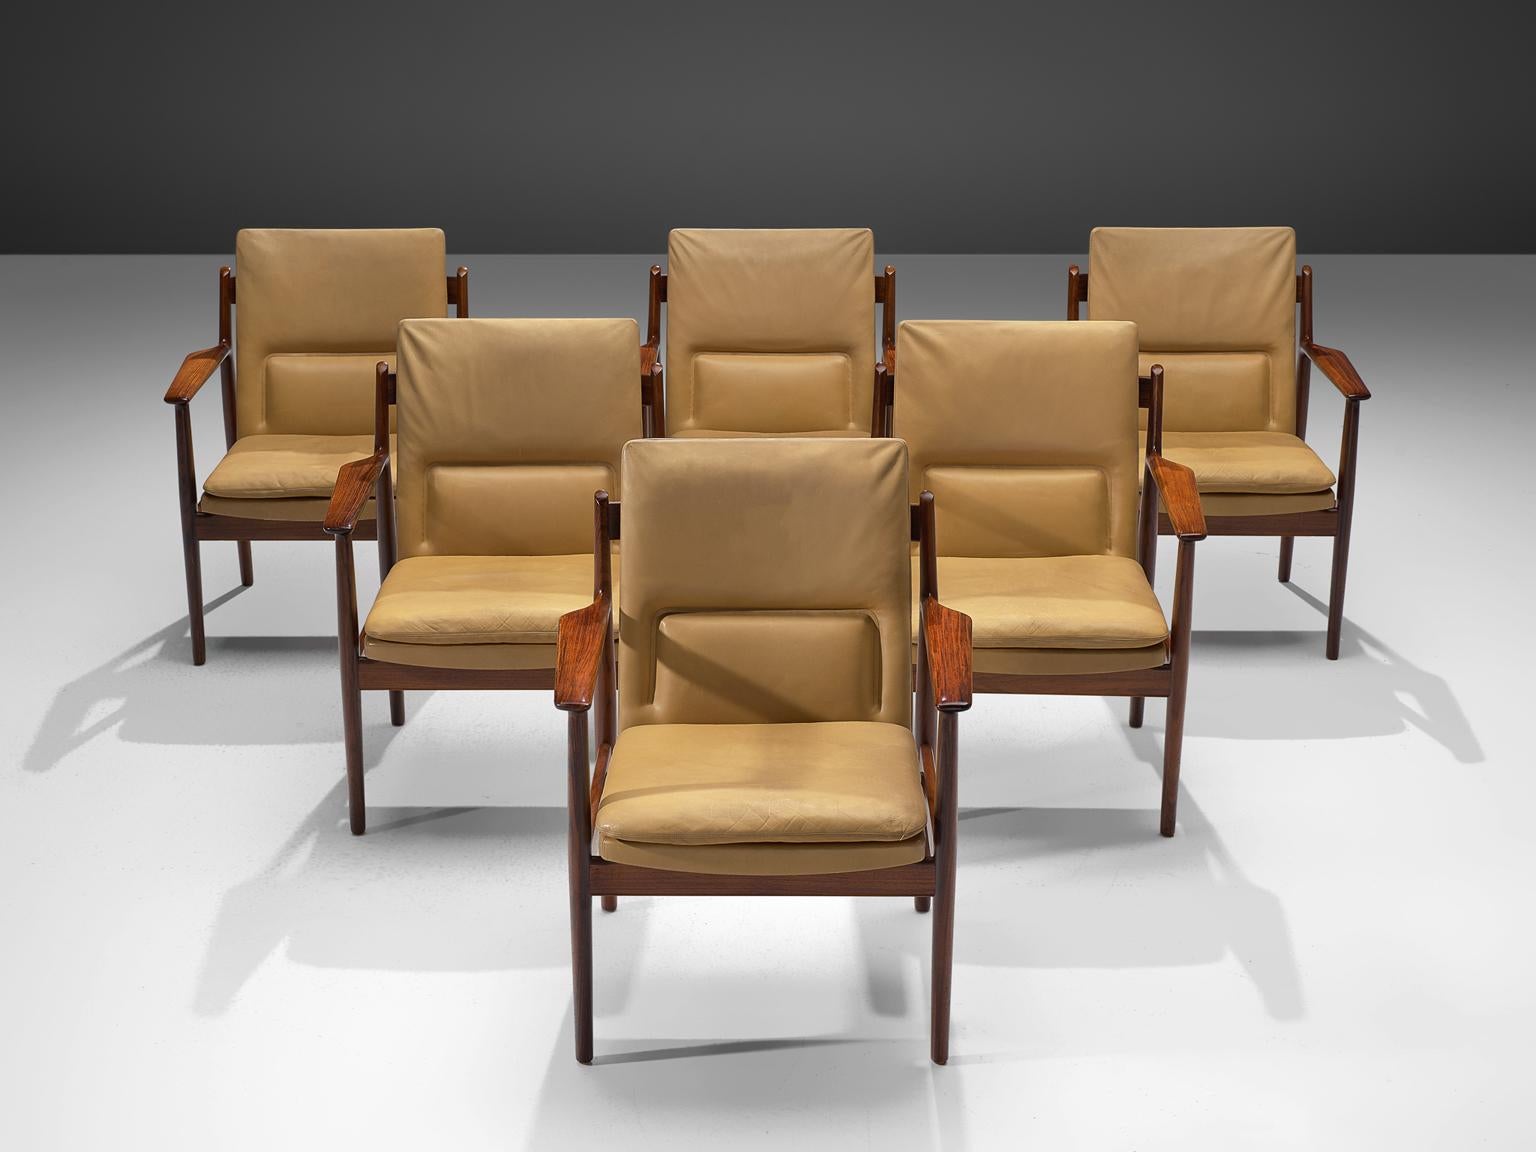 Arne Vodder for Sibast, armchairs model 431, rosewood and natural colored leather, Denmark, 1960s.

This set of 6 chairs is executed in original beige leather and rosewood, designed by the Danish designer Arne Vodder. These chairs are good examples